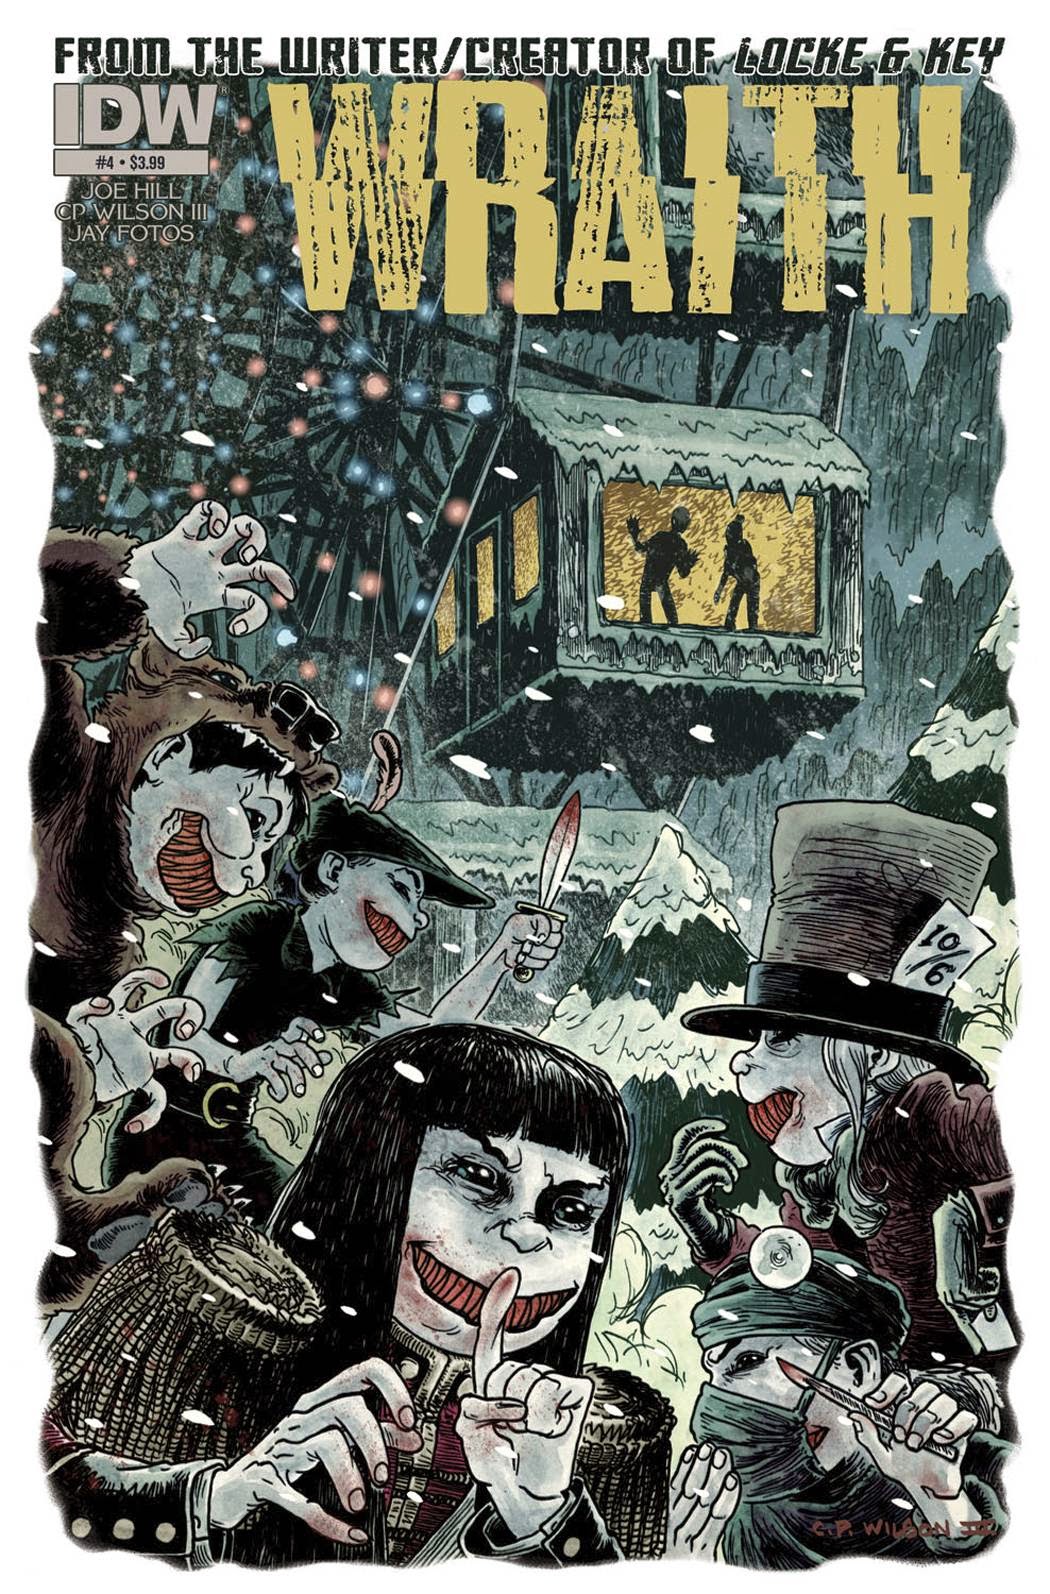 The Matt Signal: Recommended Reading for 7/13: NOS4A2 and Wraith: Welcome to Christmasland